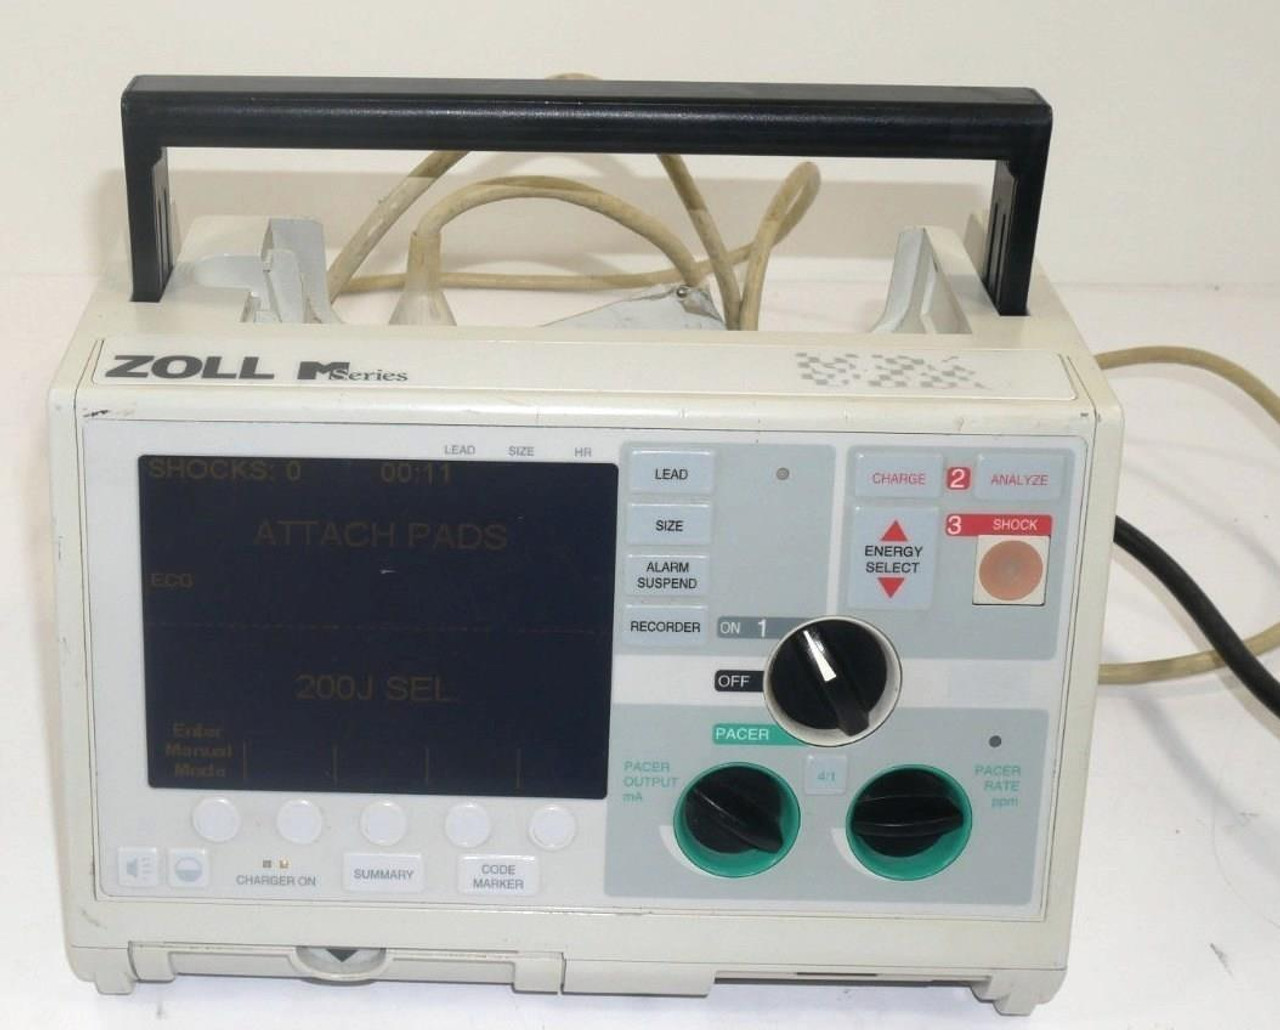 Zoll M Series Patient Monitor - Free Shipping